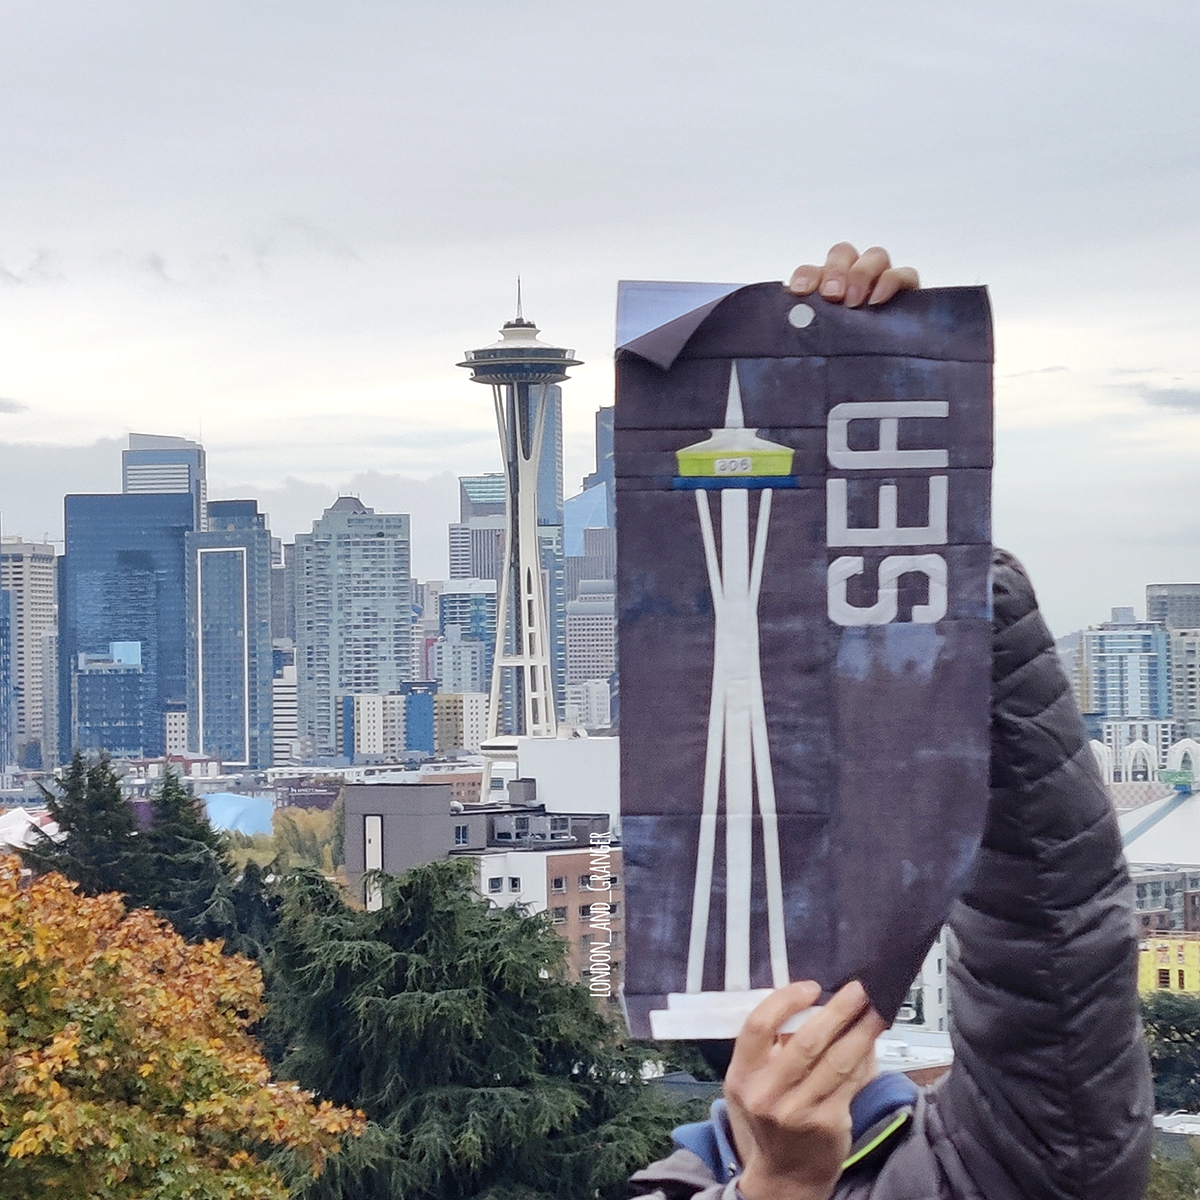 Quilt Block that looks like the Seattle Space Needle. Photo taken with Seattle in the background.